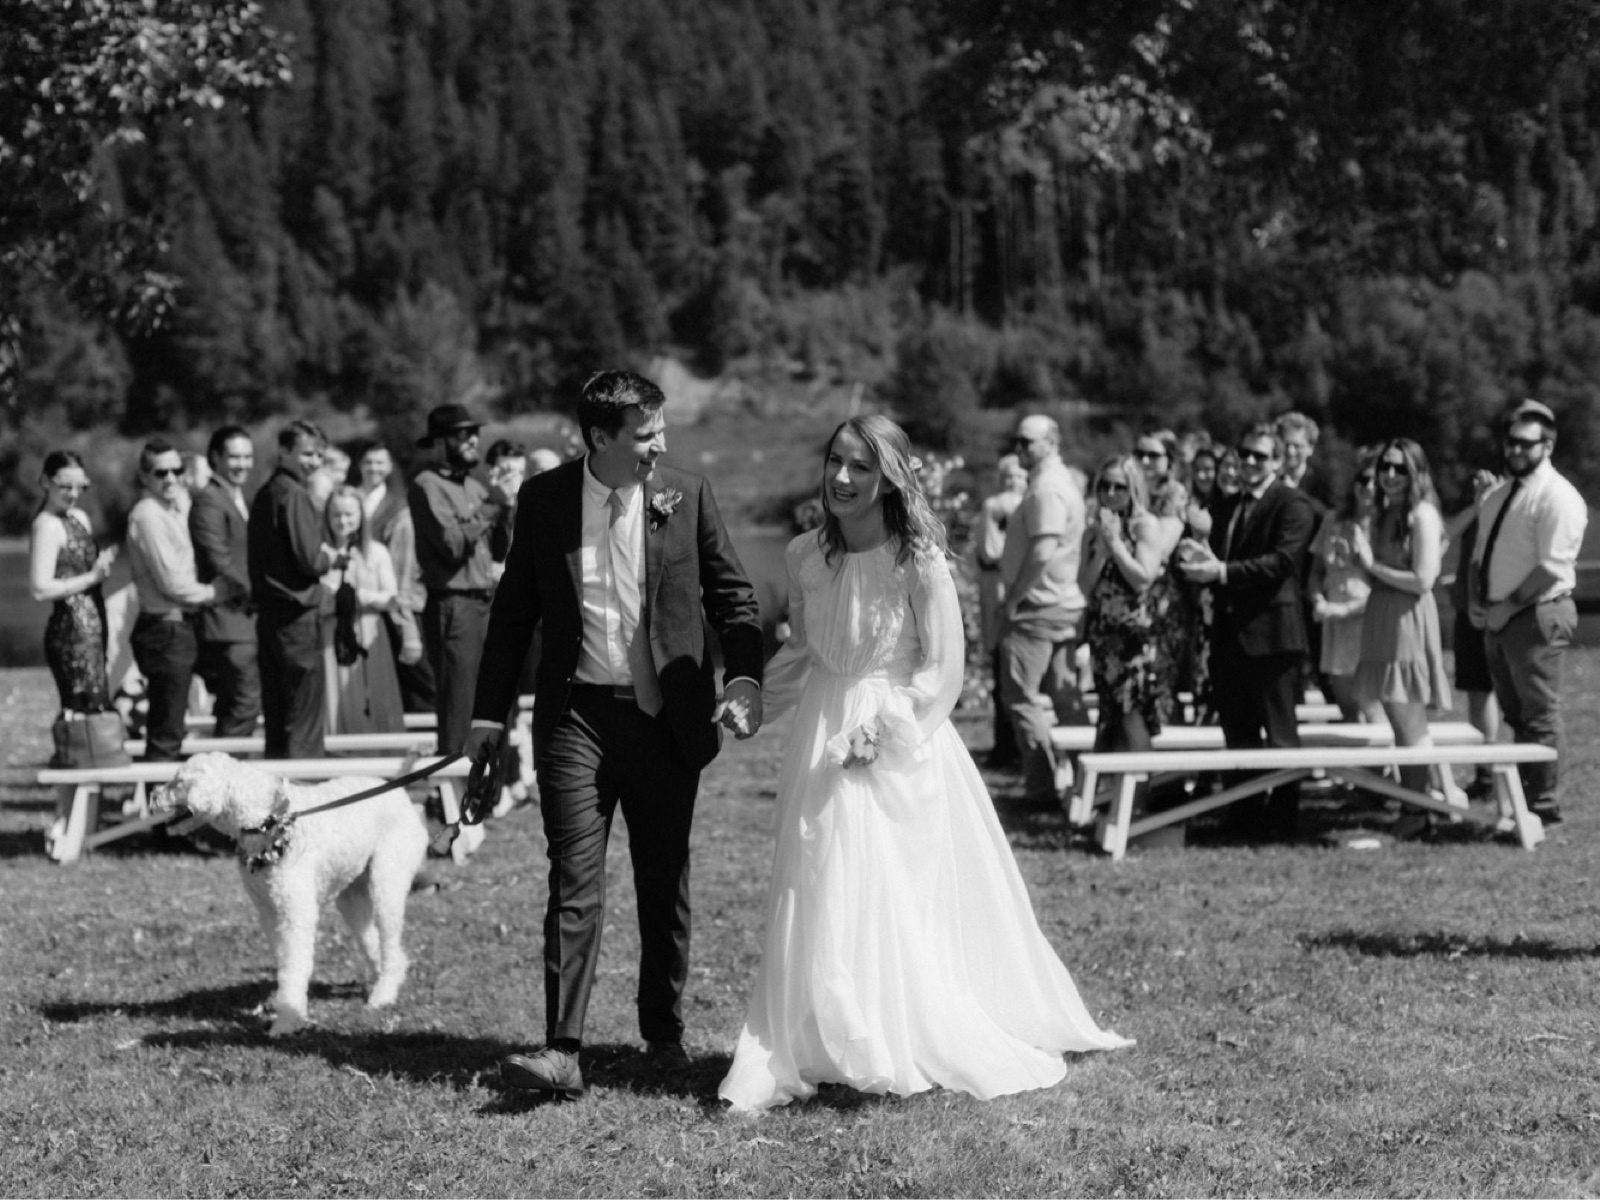 Newly married couple with their dog following their parkside wedding ceremony near their home in Prince George